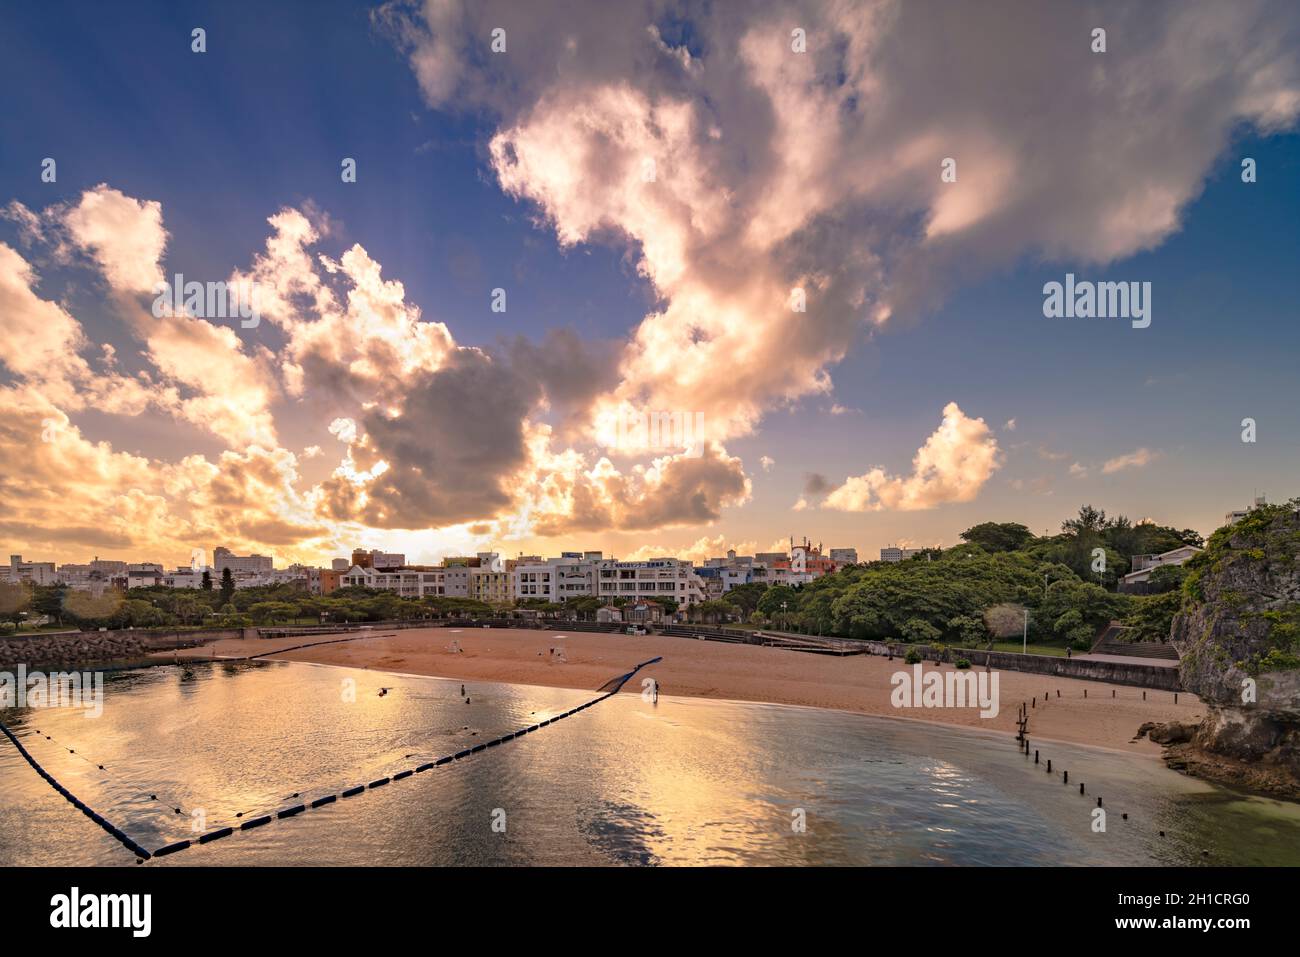 Sunrise landscape of the Naminoue beach close to the Kokusai Street Shopping District of Naha in Okinawa Prefecture, Japan. Stock Photo